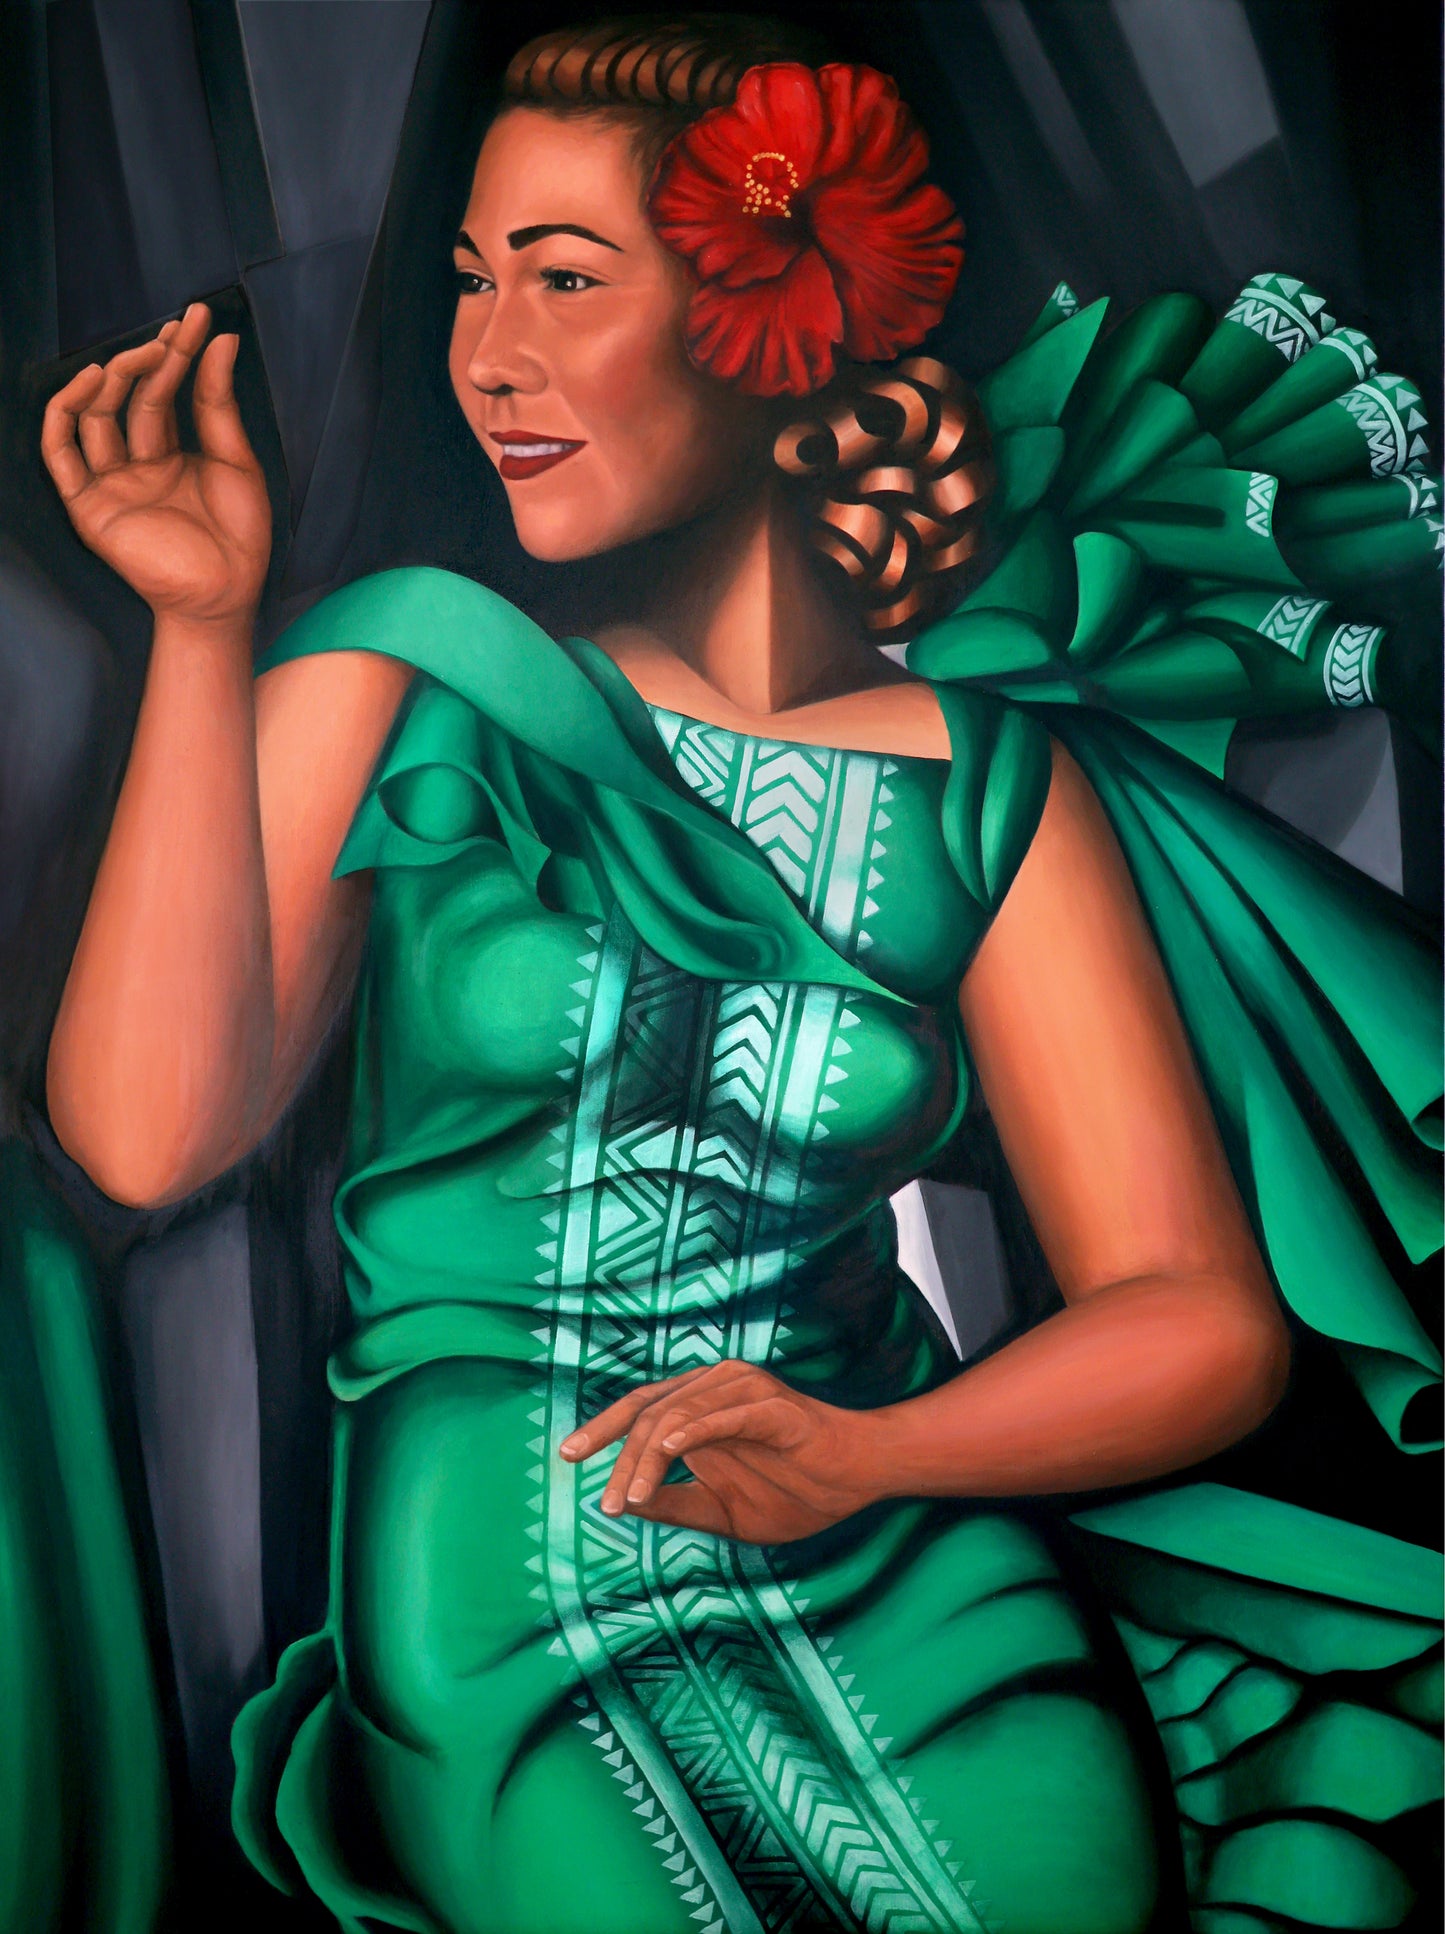 A Pacific Nod to the Lady in the Green Dress